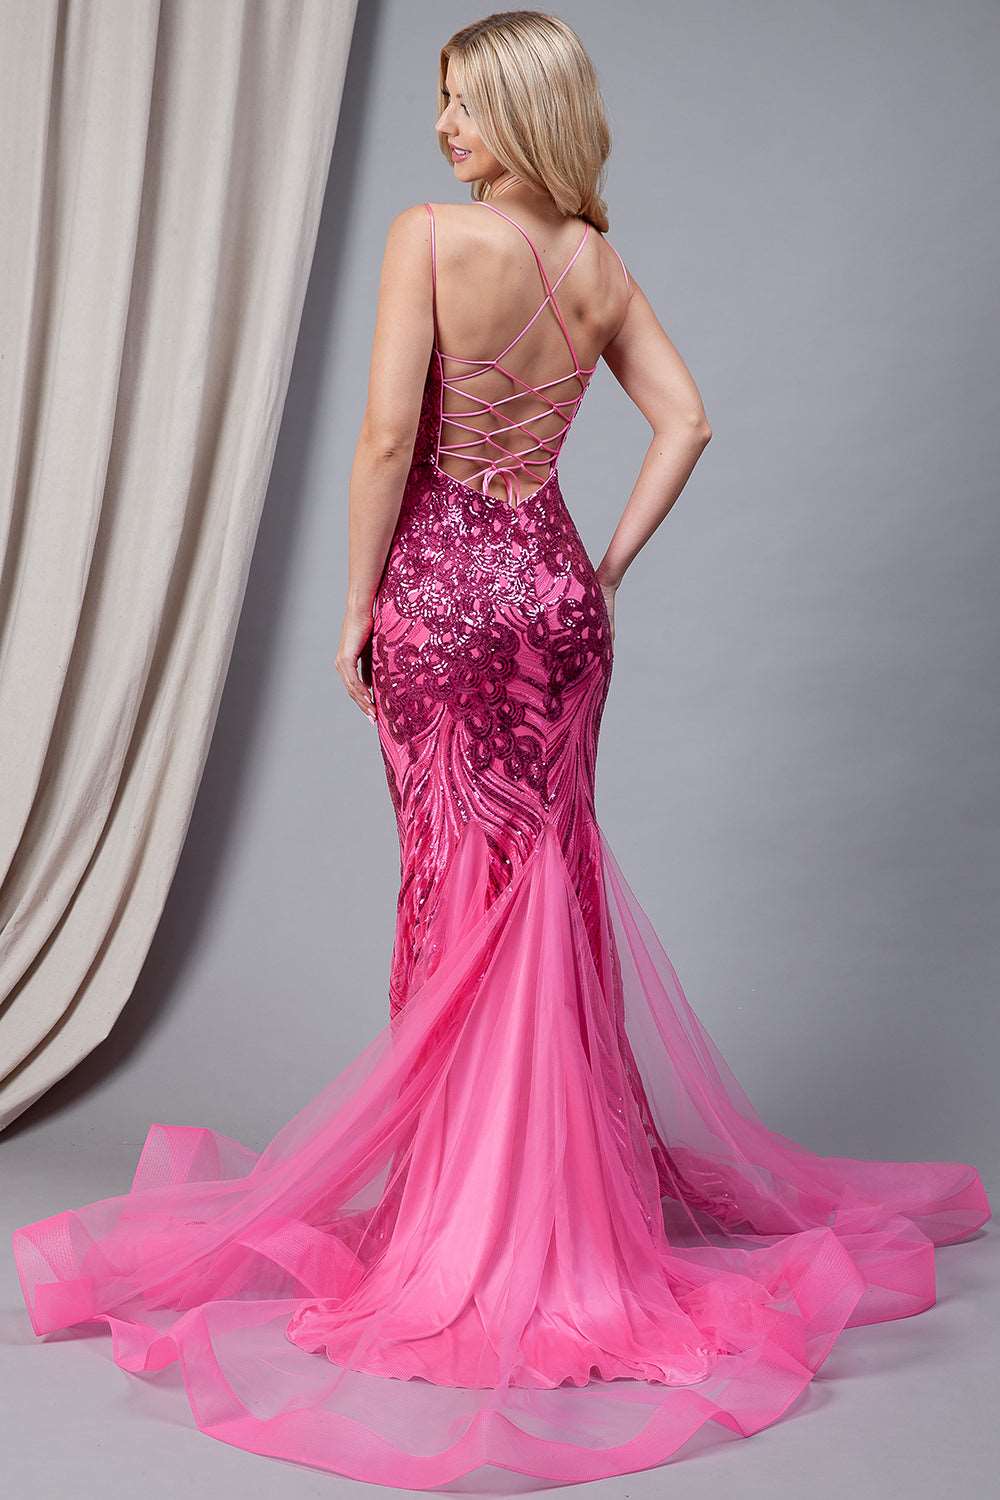 AC 7021 - Sequin Embellished Fit & Flare Prom Gown with Open Lace